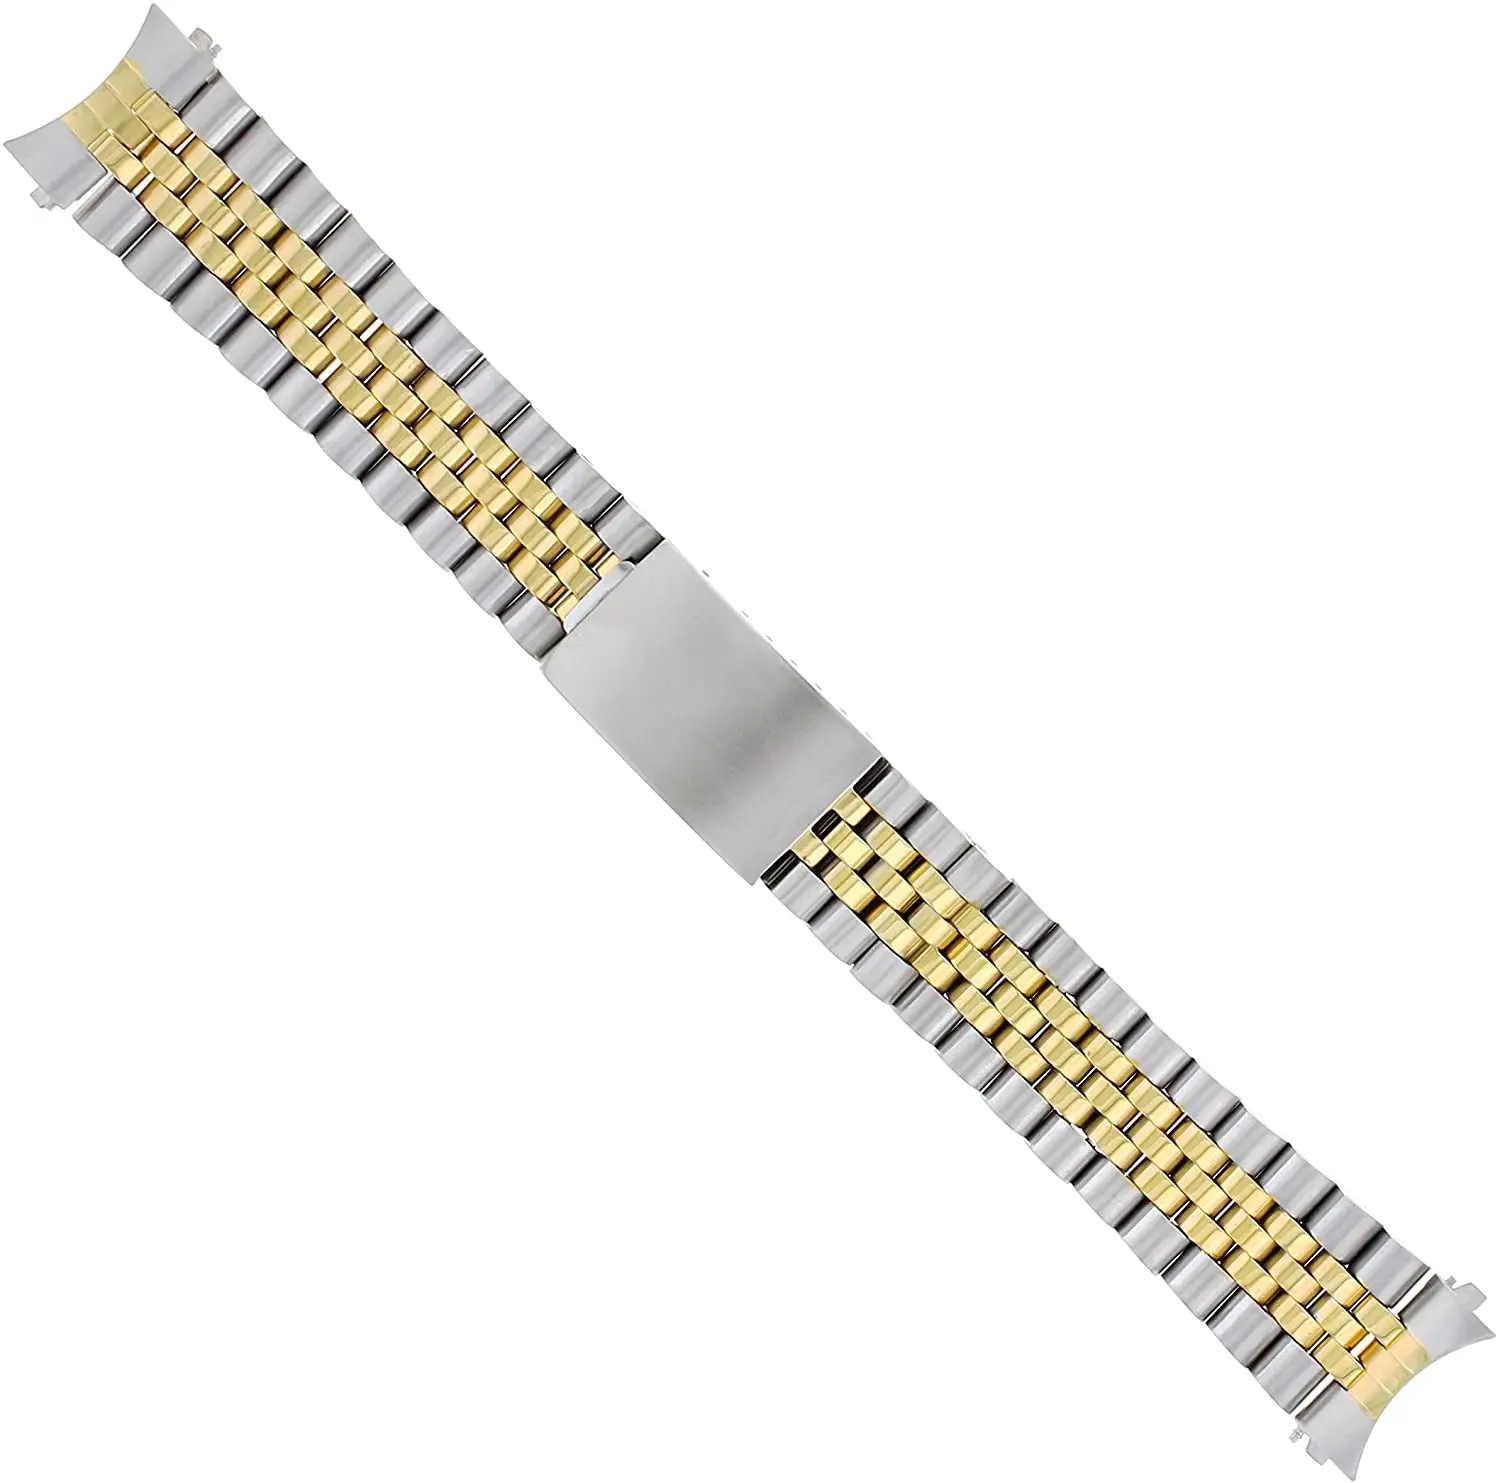 

20mm Jubilee Watch Band Bracelet Compatible with Rolex Datejust 16013 16233 16234 Stainless Steel Watch Accessories Band